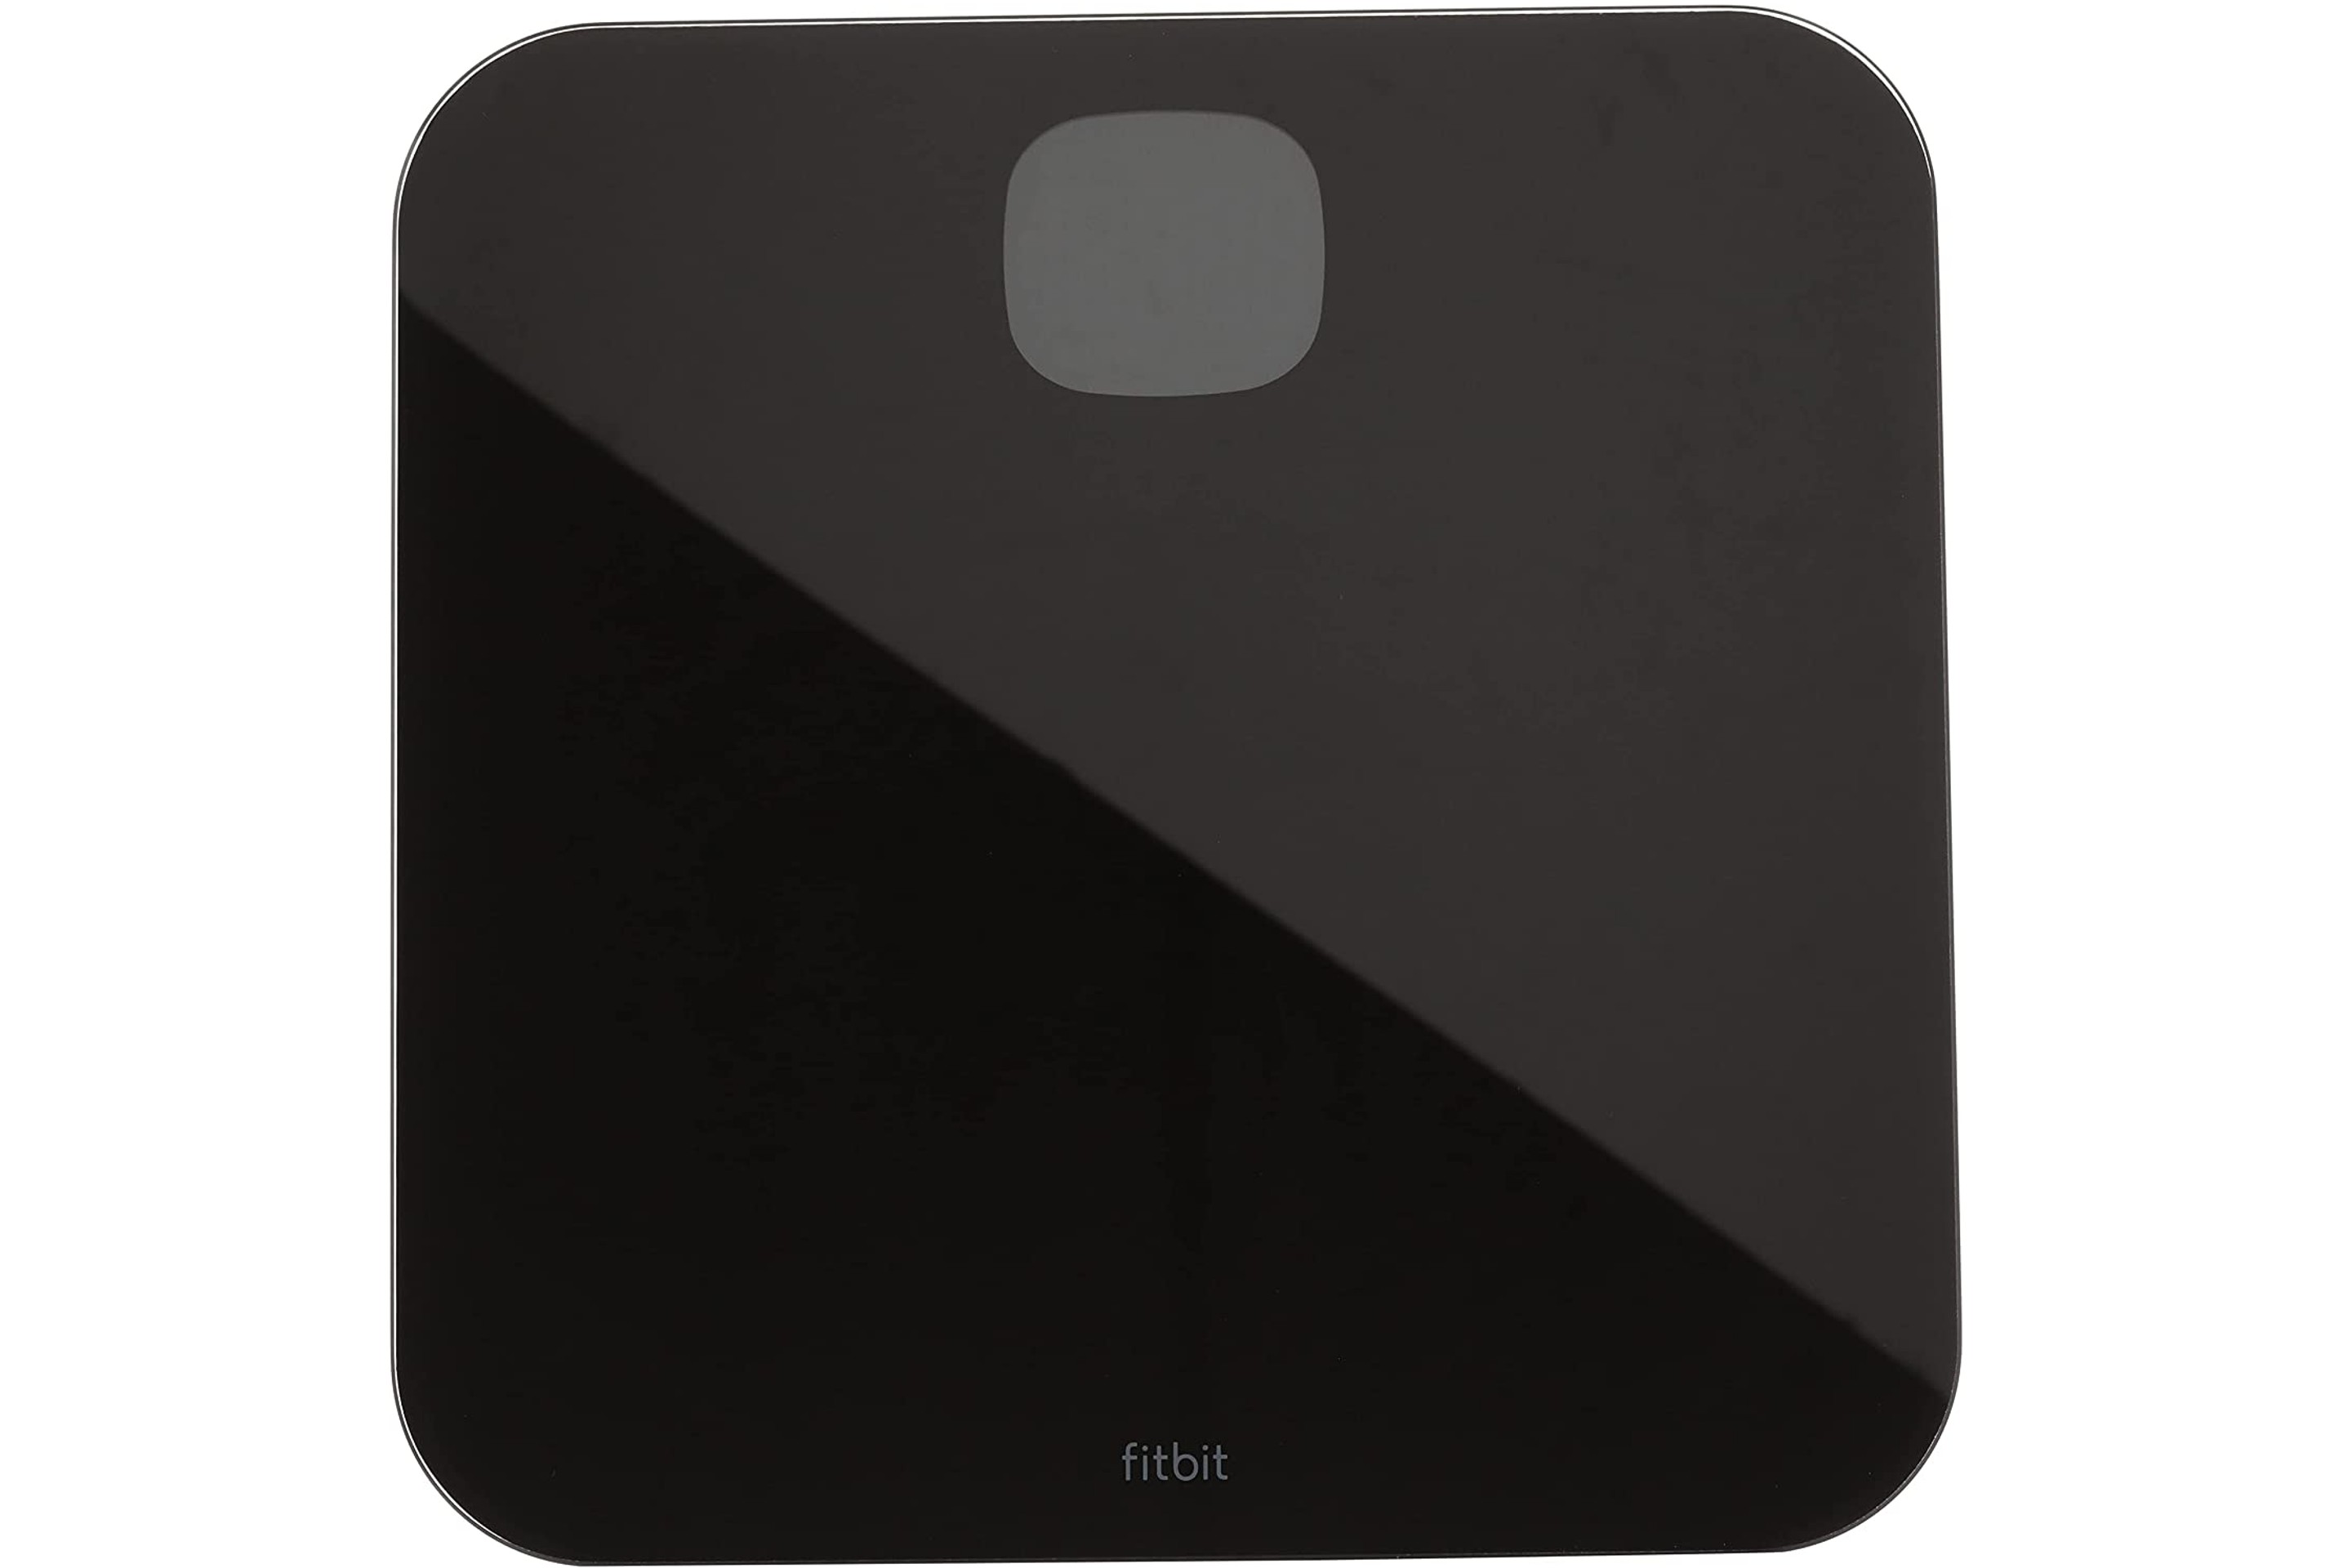 Fitbit Aria Air Body Weight and BMI Smart Scale